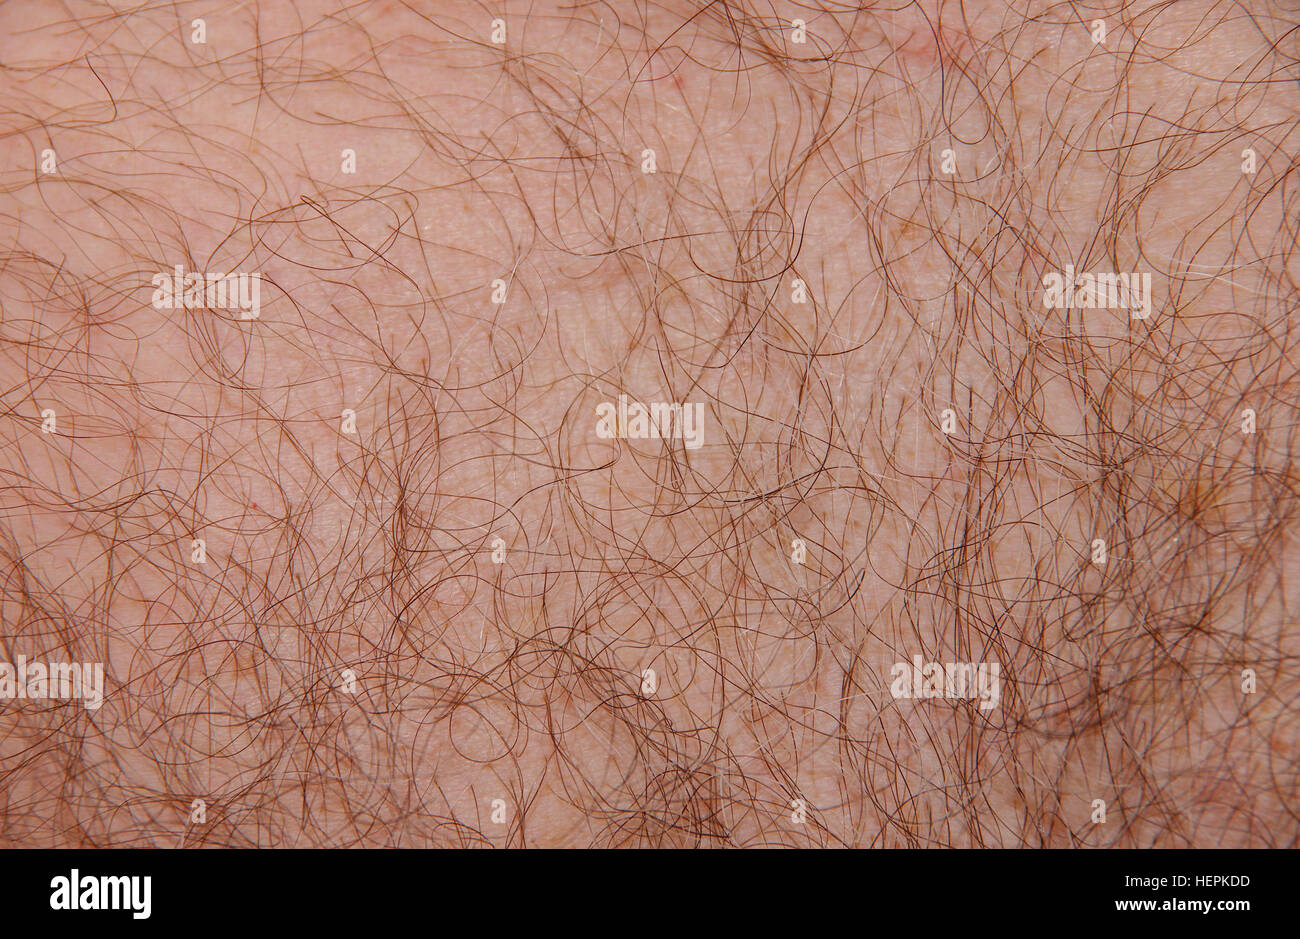 Caucasian male skin, here part of the chest. Stock Photo